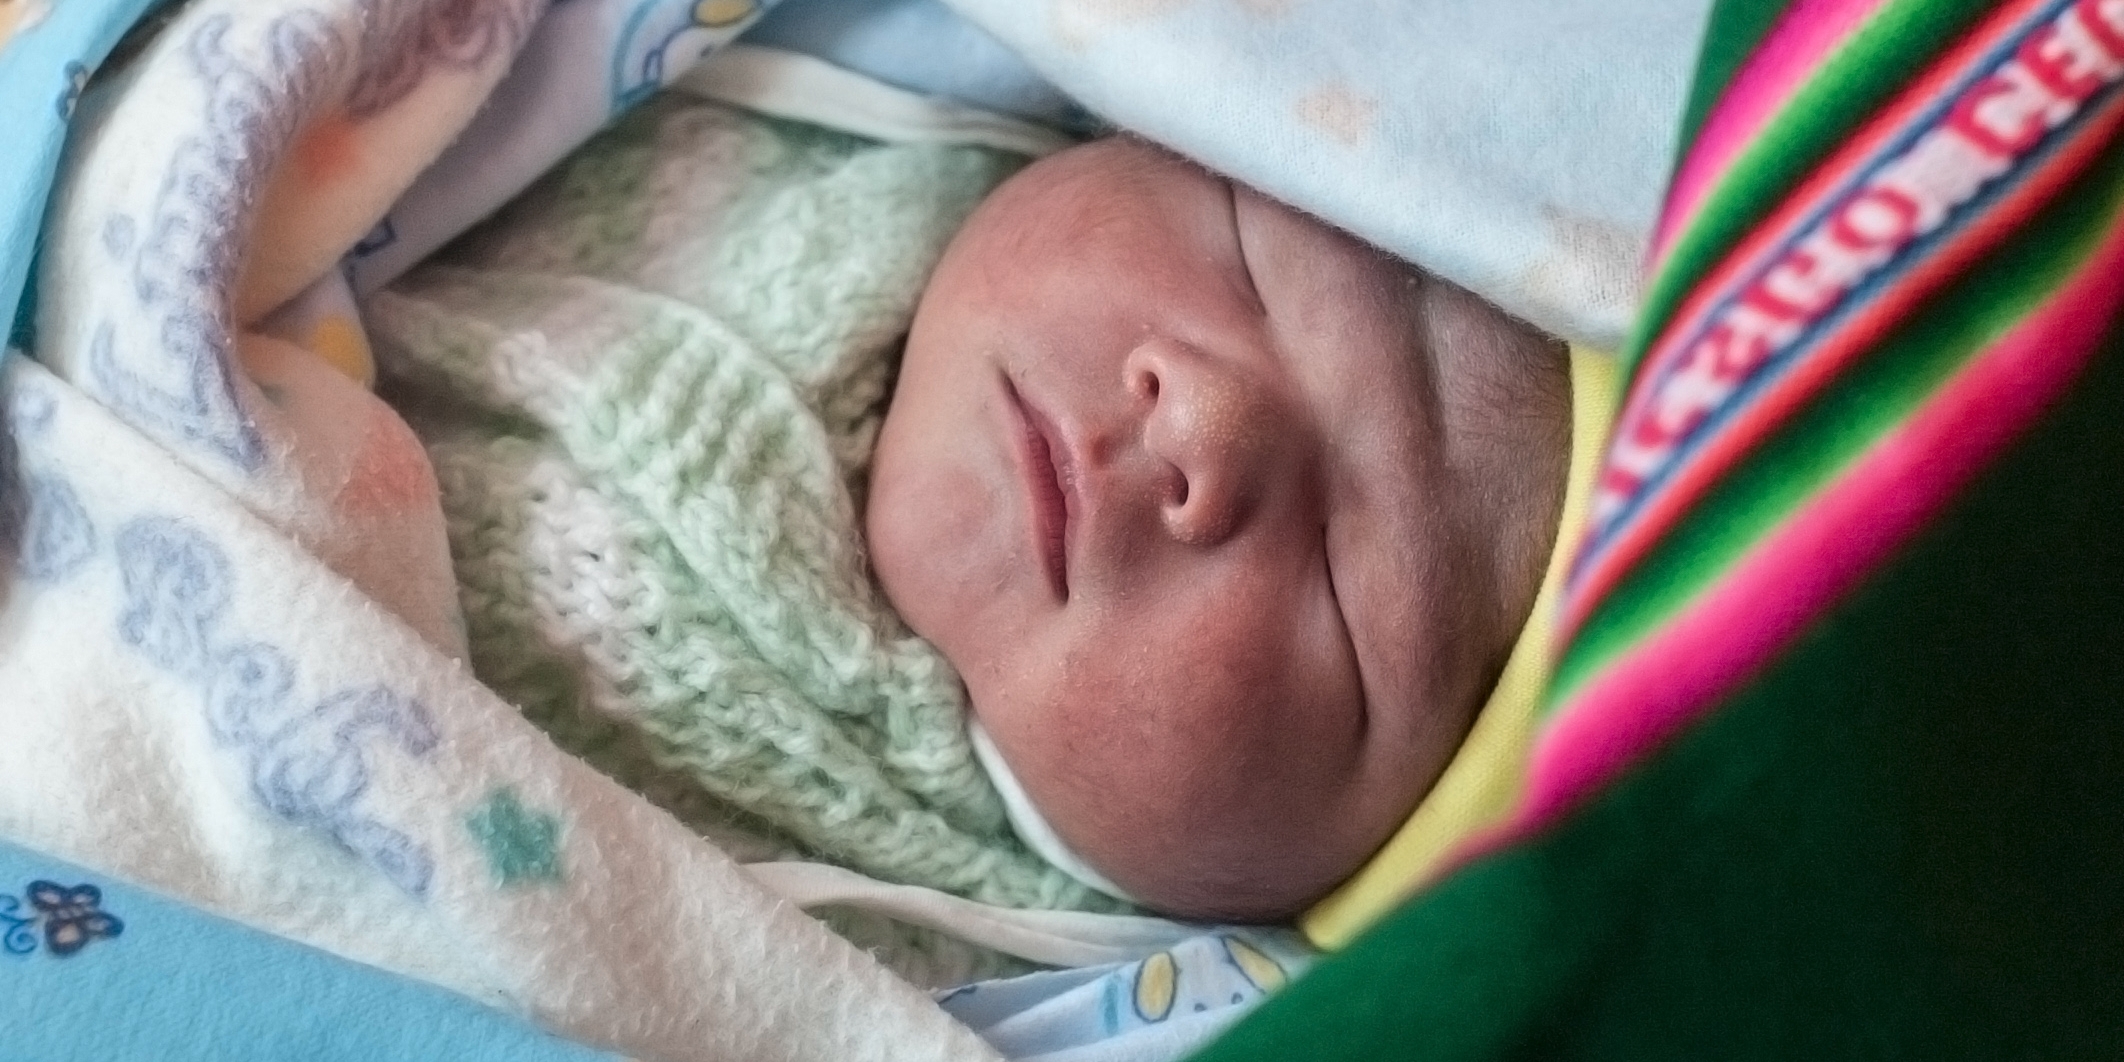 A healthy newborn, a brand new, one-day-old baby, here in his colorful aguayo, and his mother Liseth are alive and thriving, thanks to the support of Save the Children's vital work in Bolivia. Photo Credit: Susan Warner/Save the Children 2015.